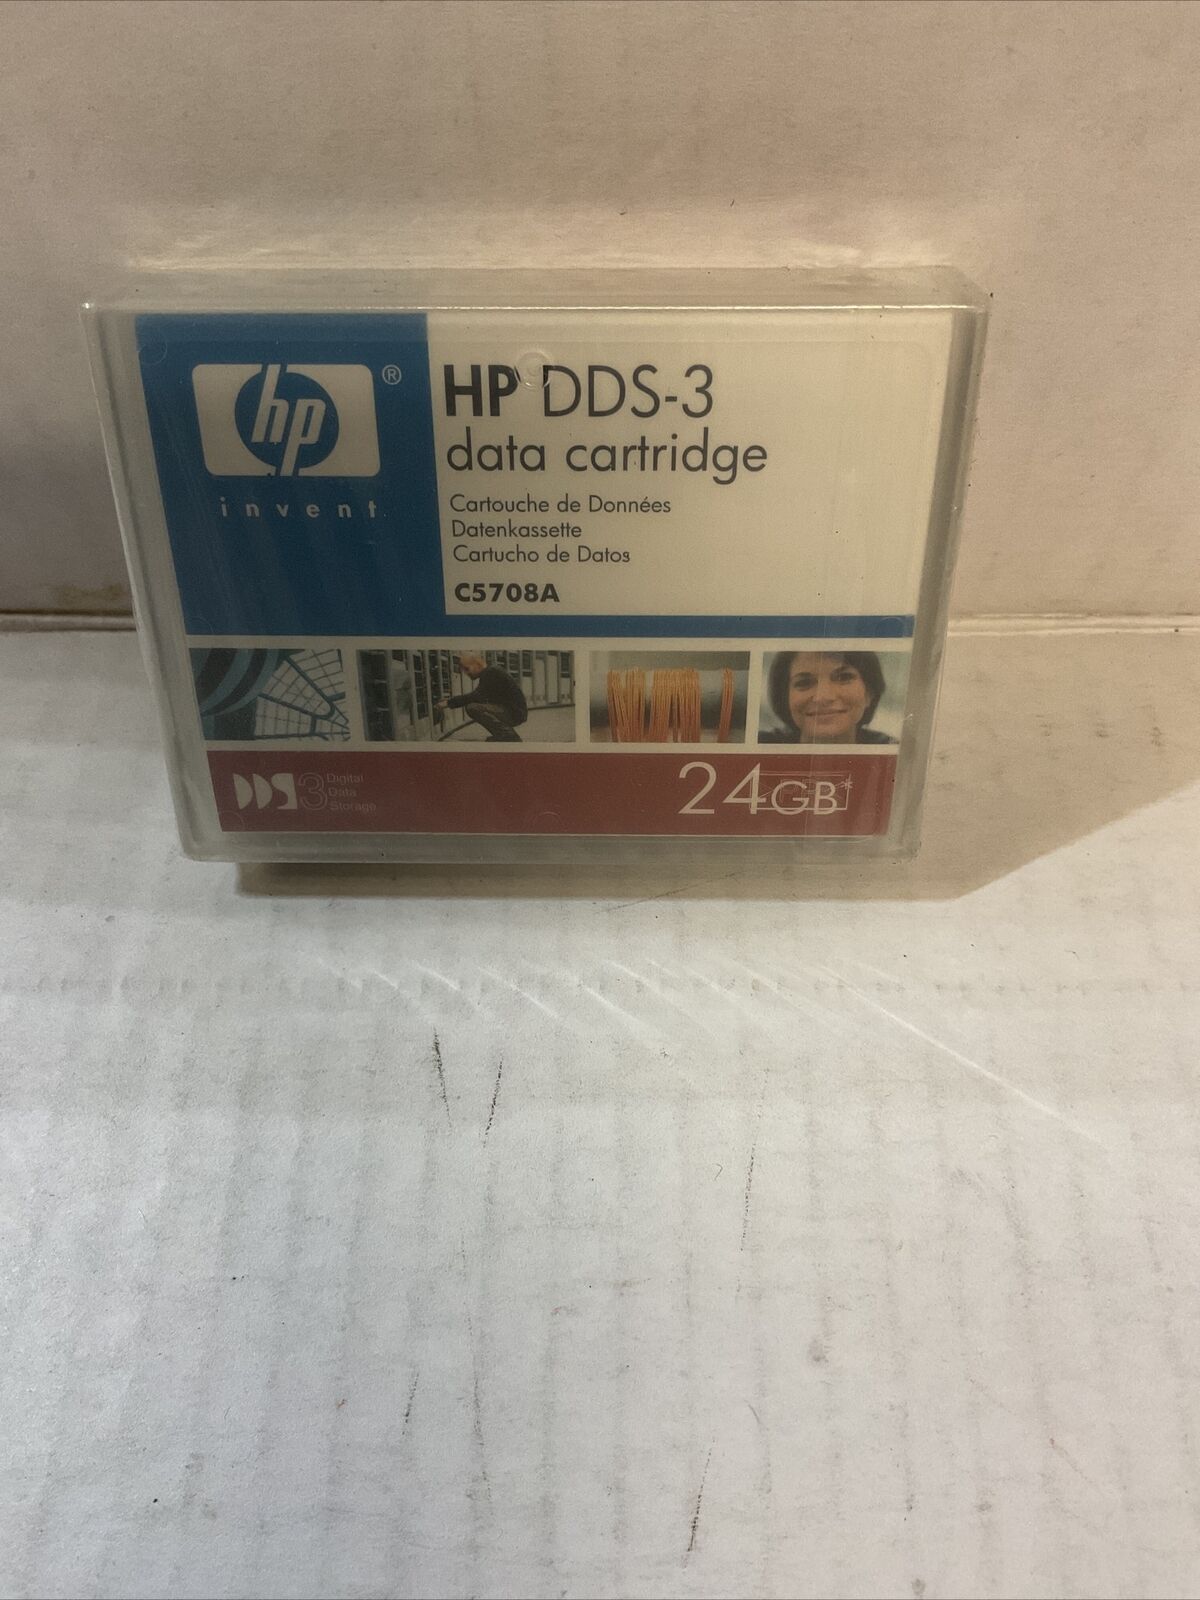 HP C5708A DDS-3 24GB 4mm DDS3 Data Tape Cartridge - Made in Japan - NEW & SEALED